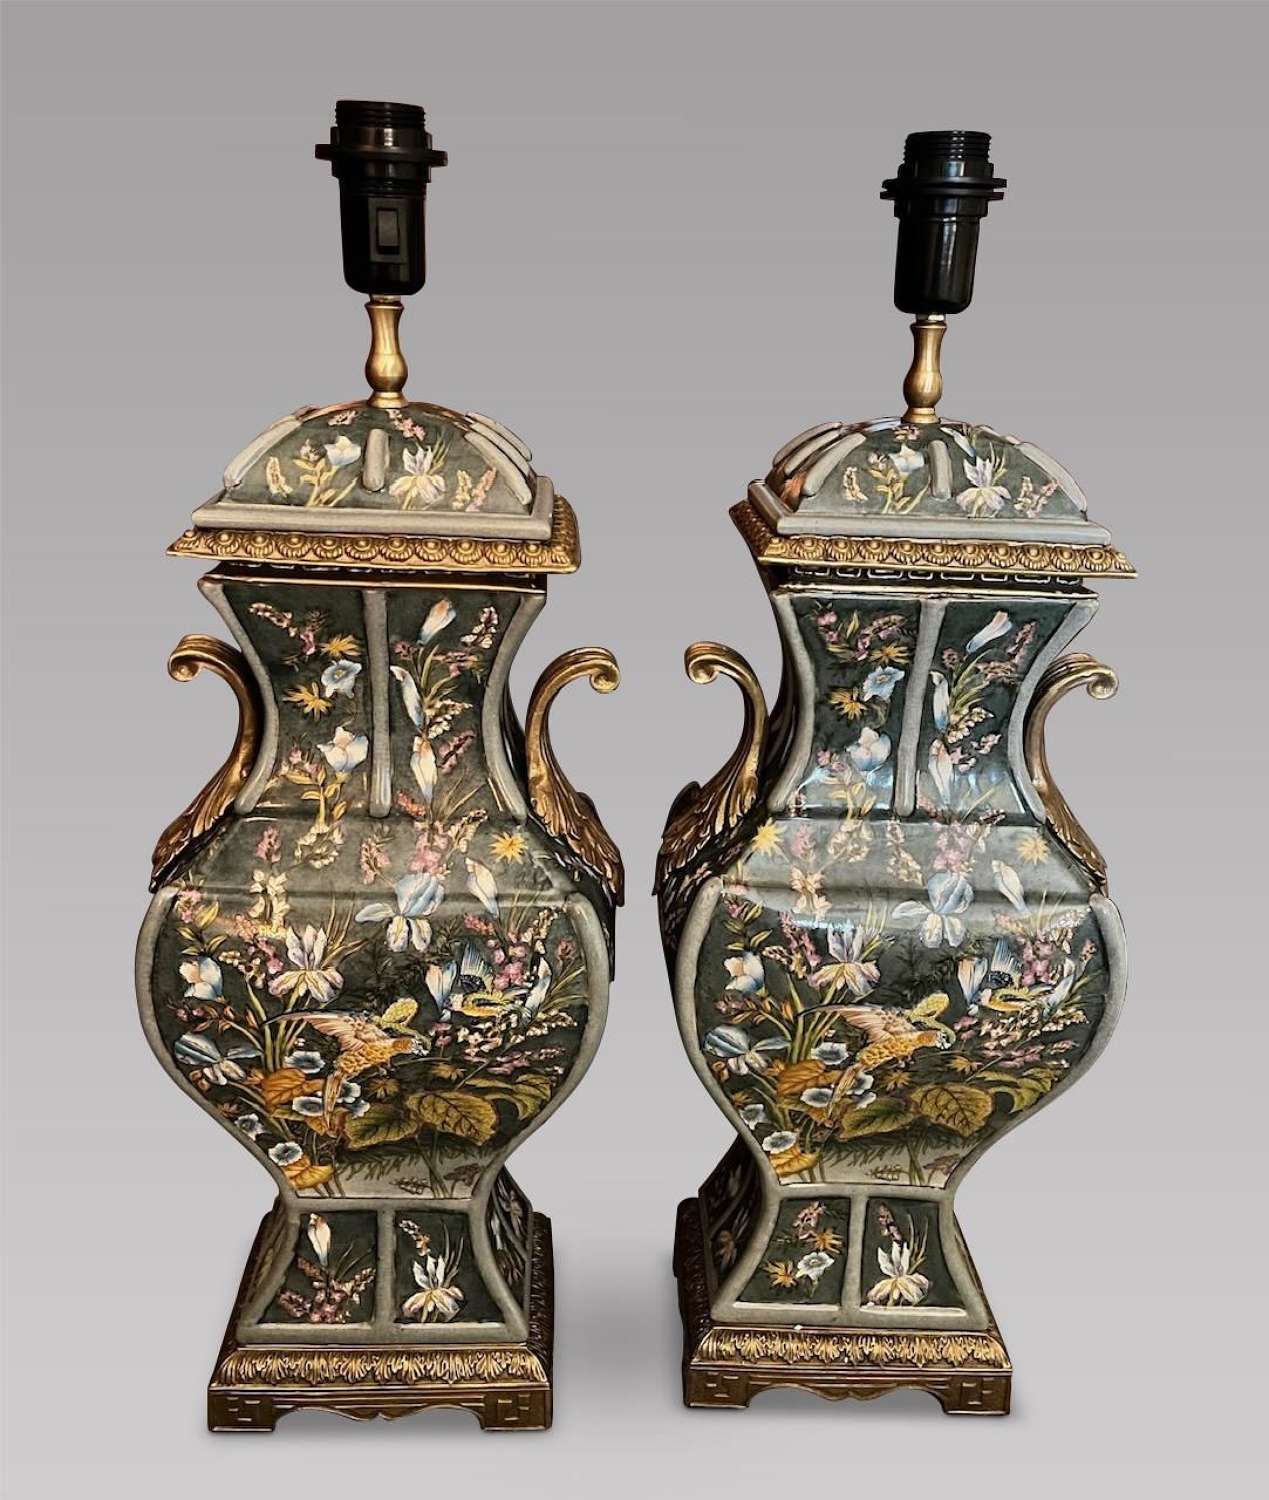 Pair of Decorative Chinese Lamps